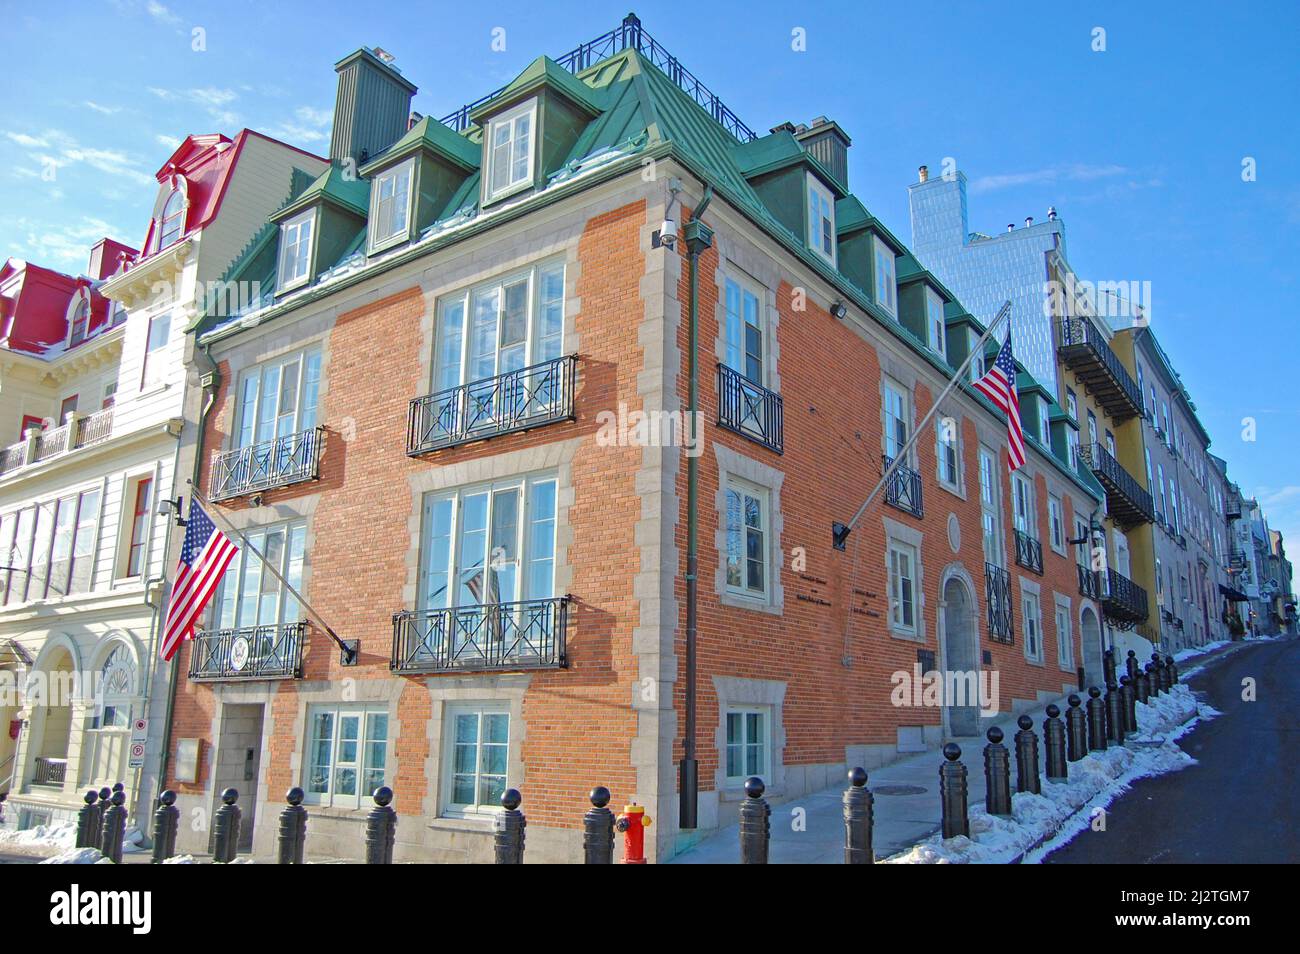 Consulate General of the United States of America in Old Quebec City, Quebec QC, Canada. Historic District of Quebec City is UNESCO World Heritage Sit Stock Photo